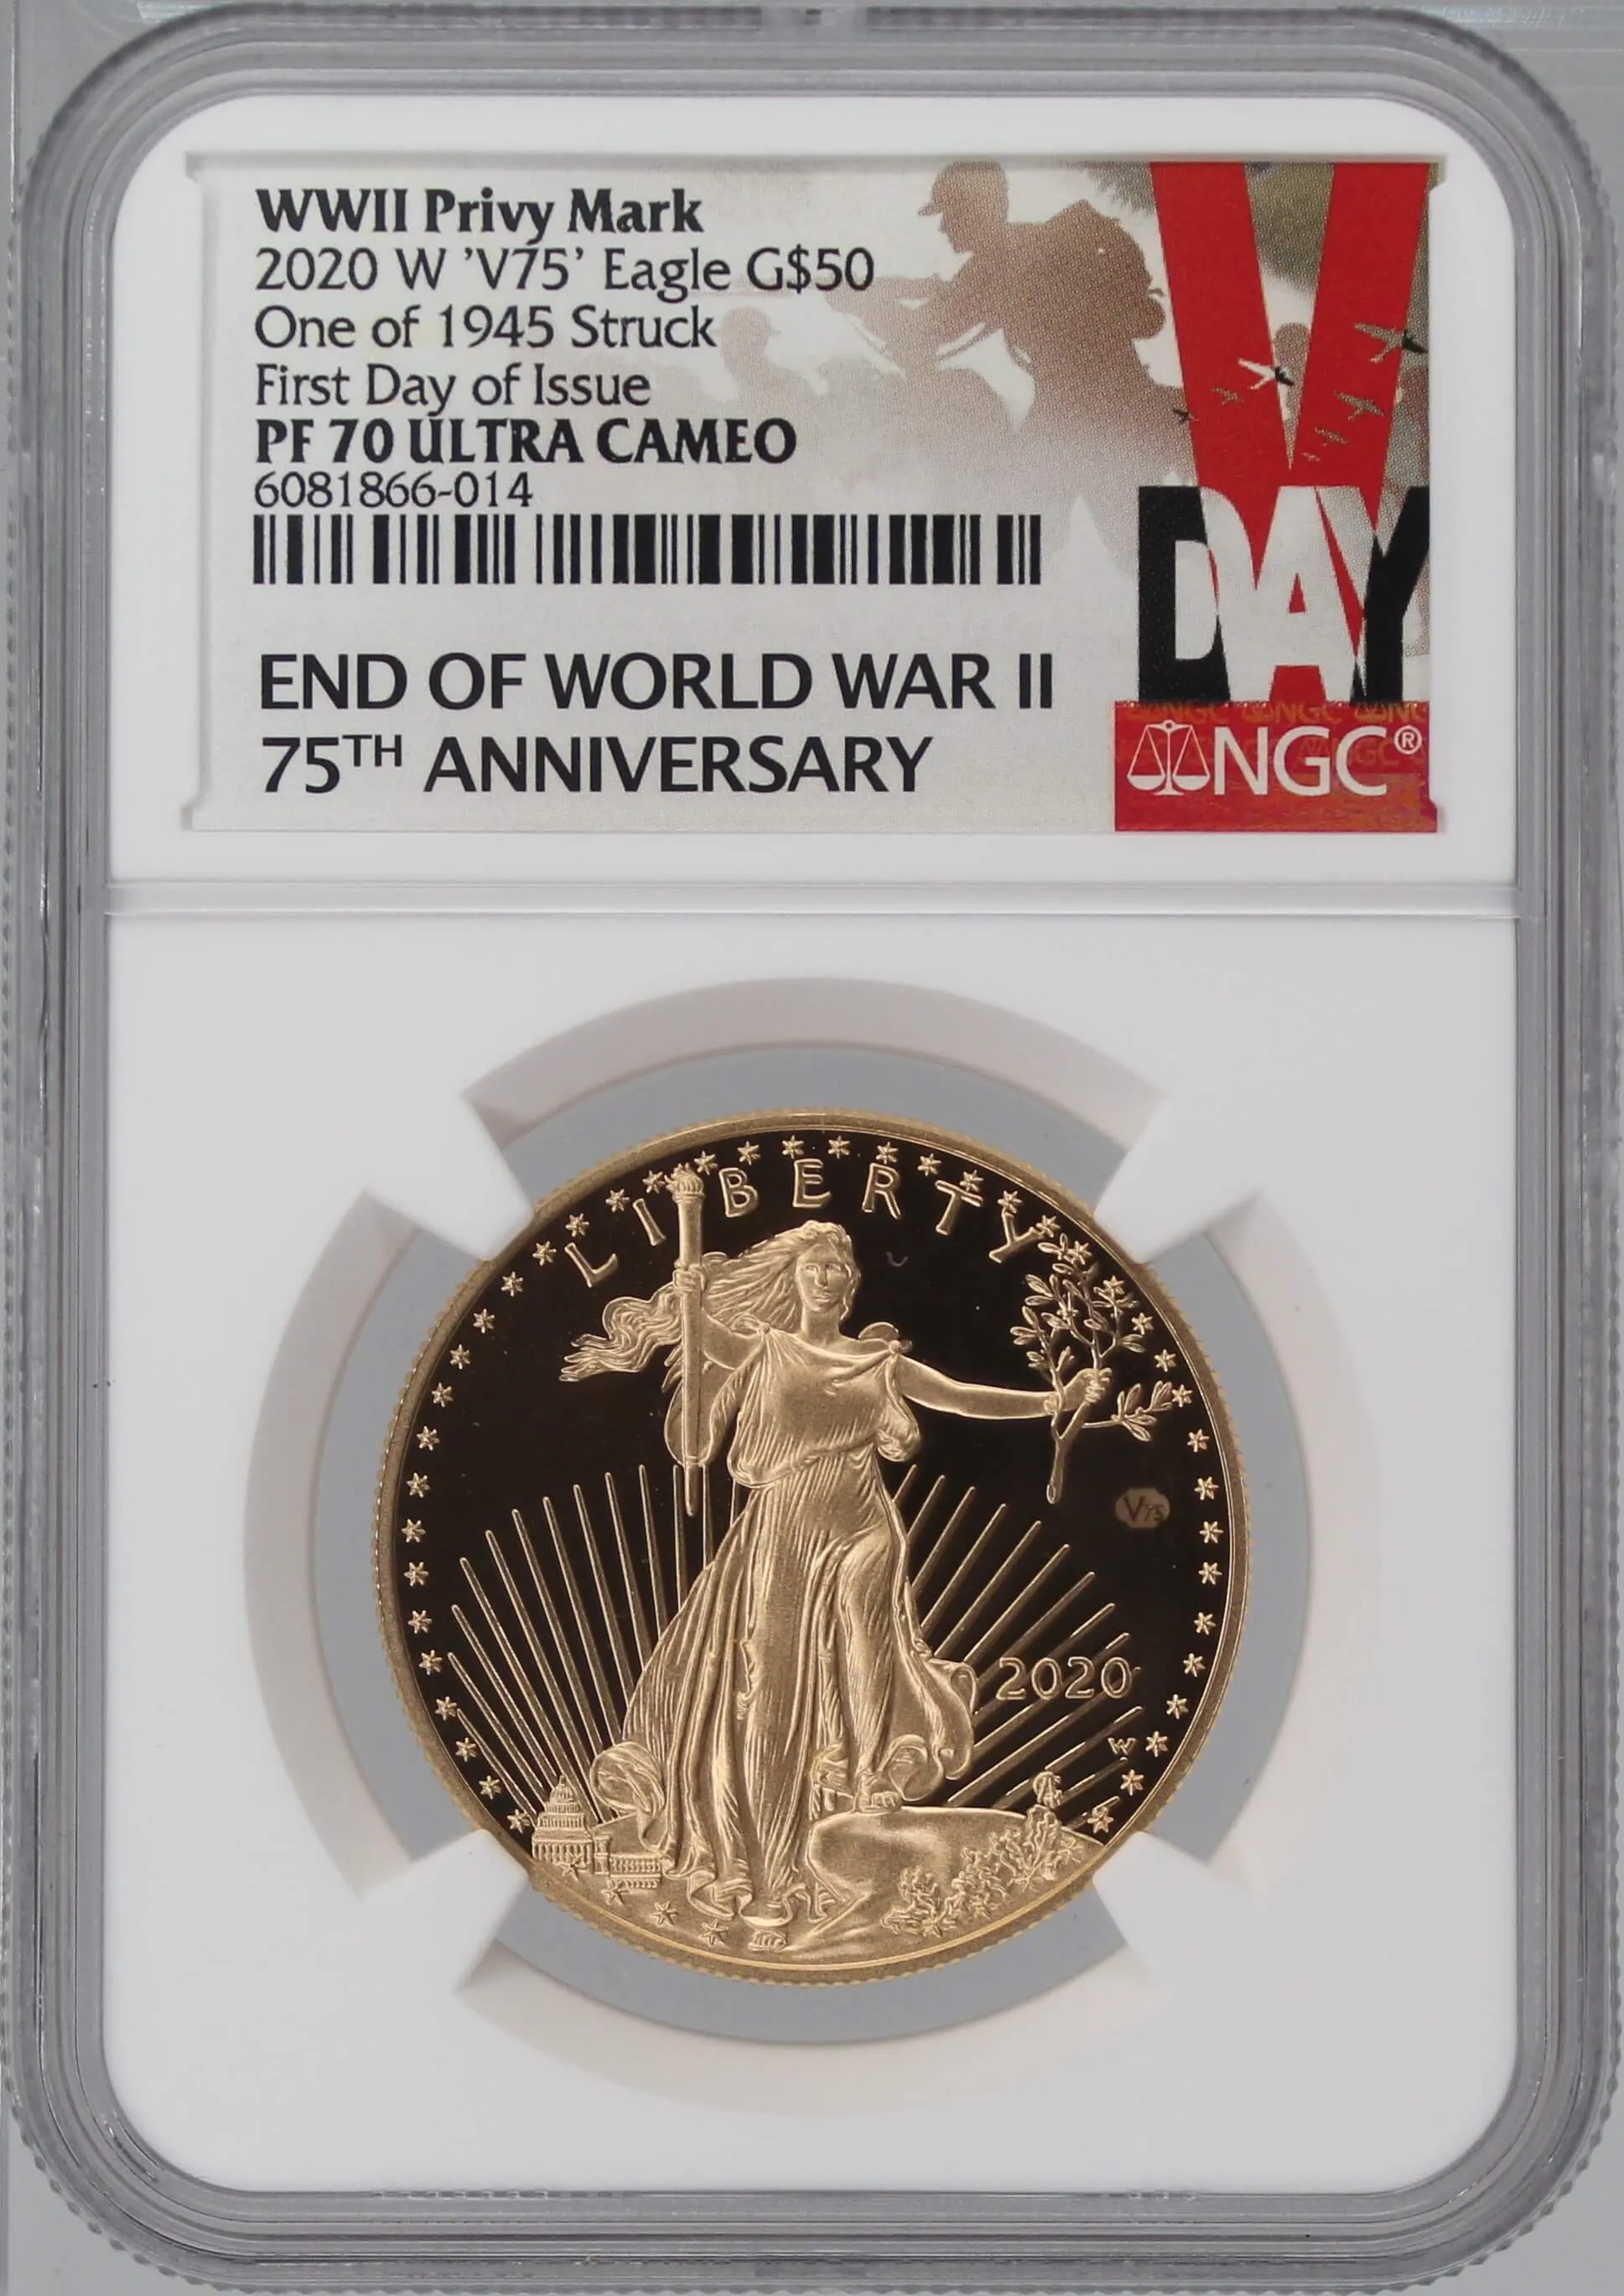 2020 W $50 Gold Eagle 75th Anv WWll Privy NGC PF70 UCAM First Day of Issue V75 Label